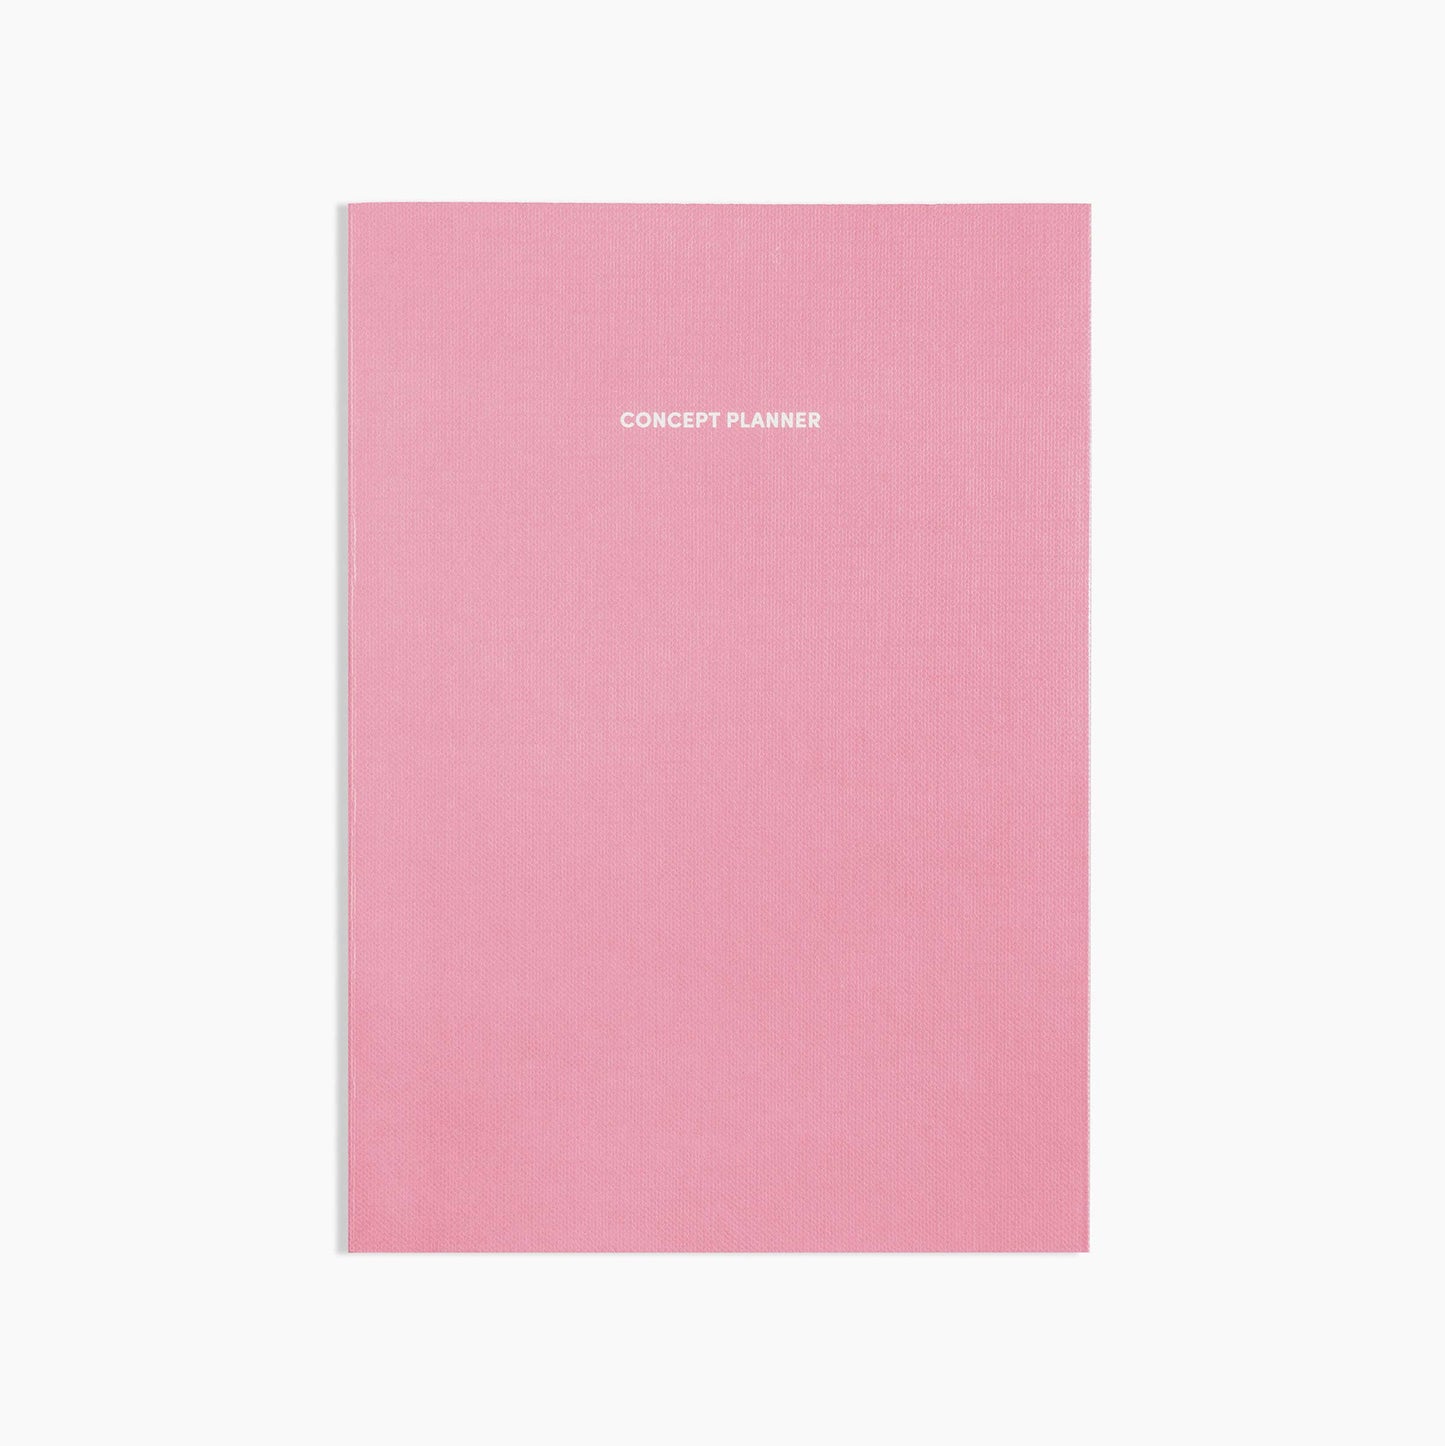 Concept Planner in Rose